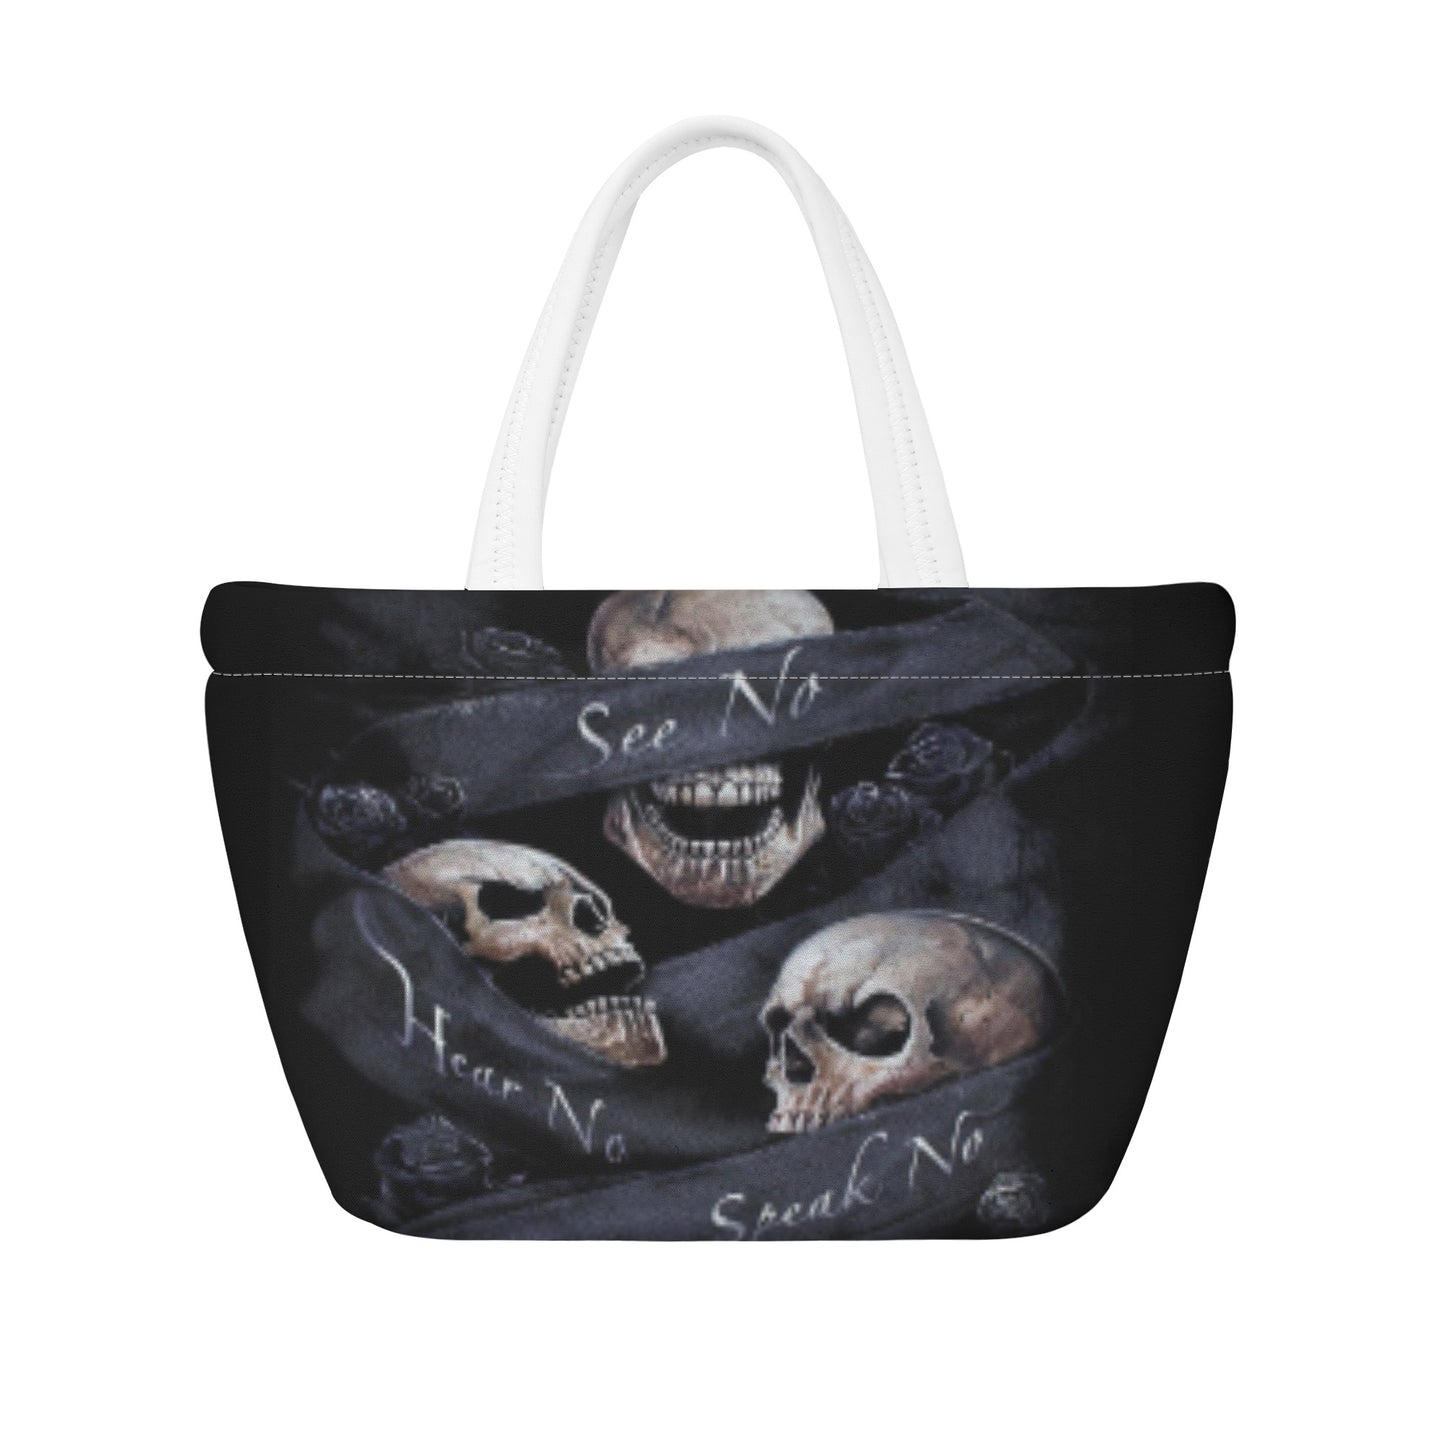 No see no hear no speak evils New Style Lunch Bag